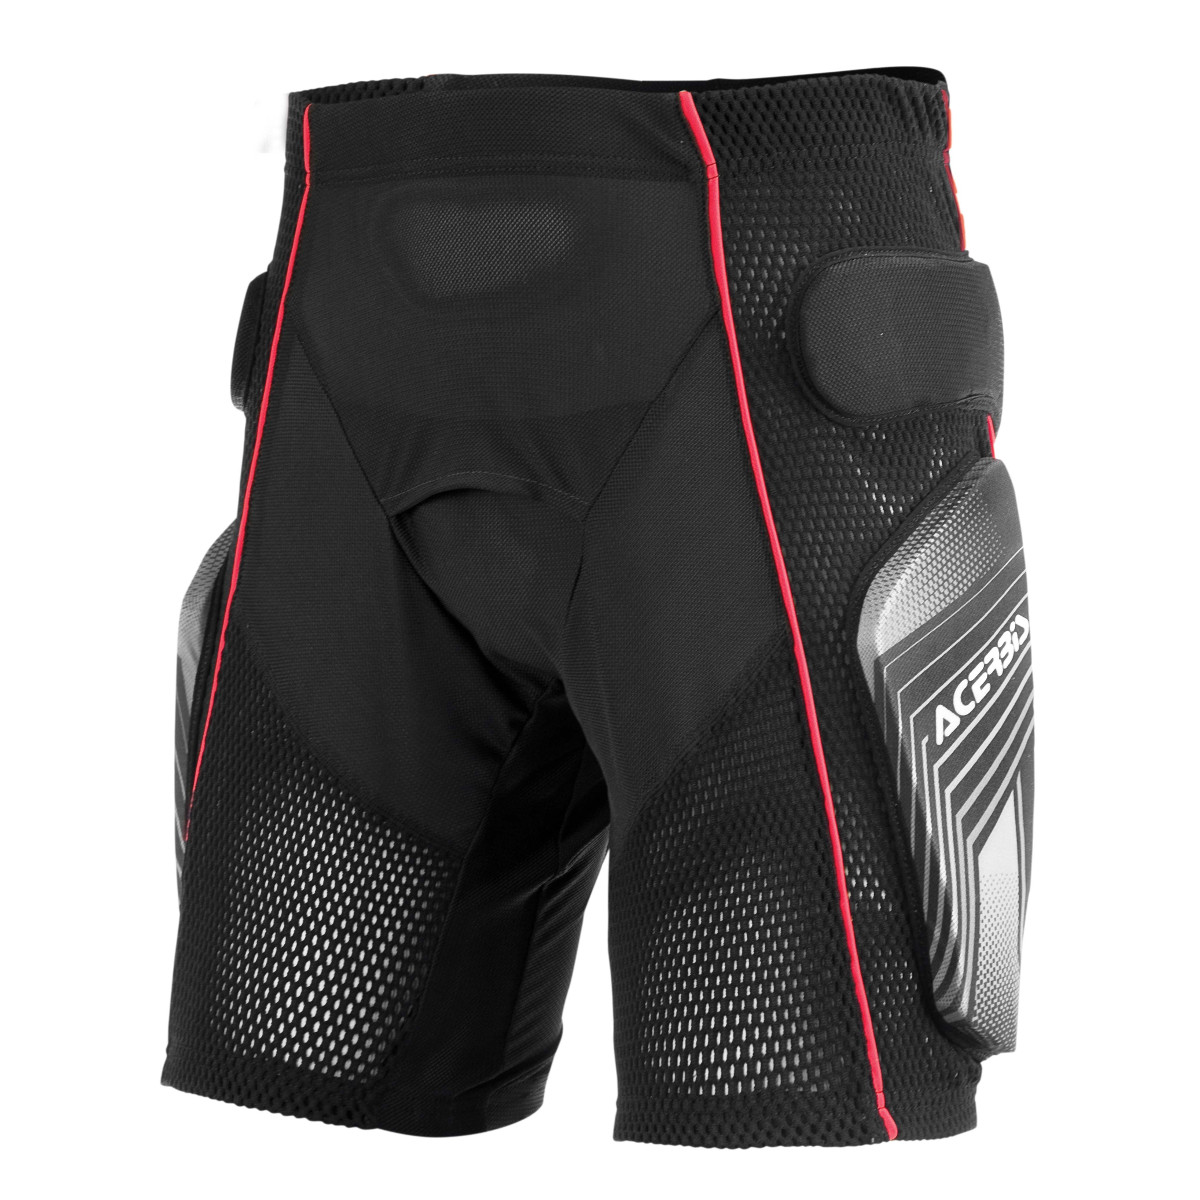 Acerbis Protector Shorts Soft 2.0 Grey/Black/Red